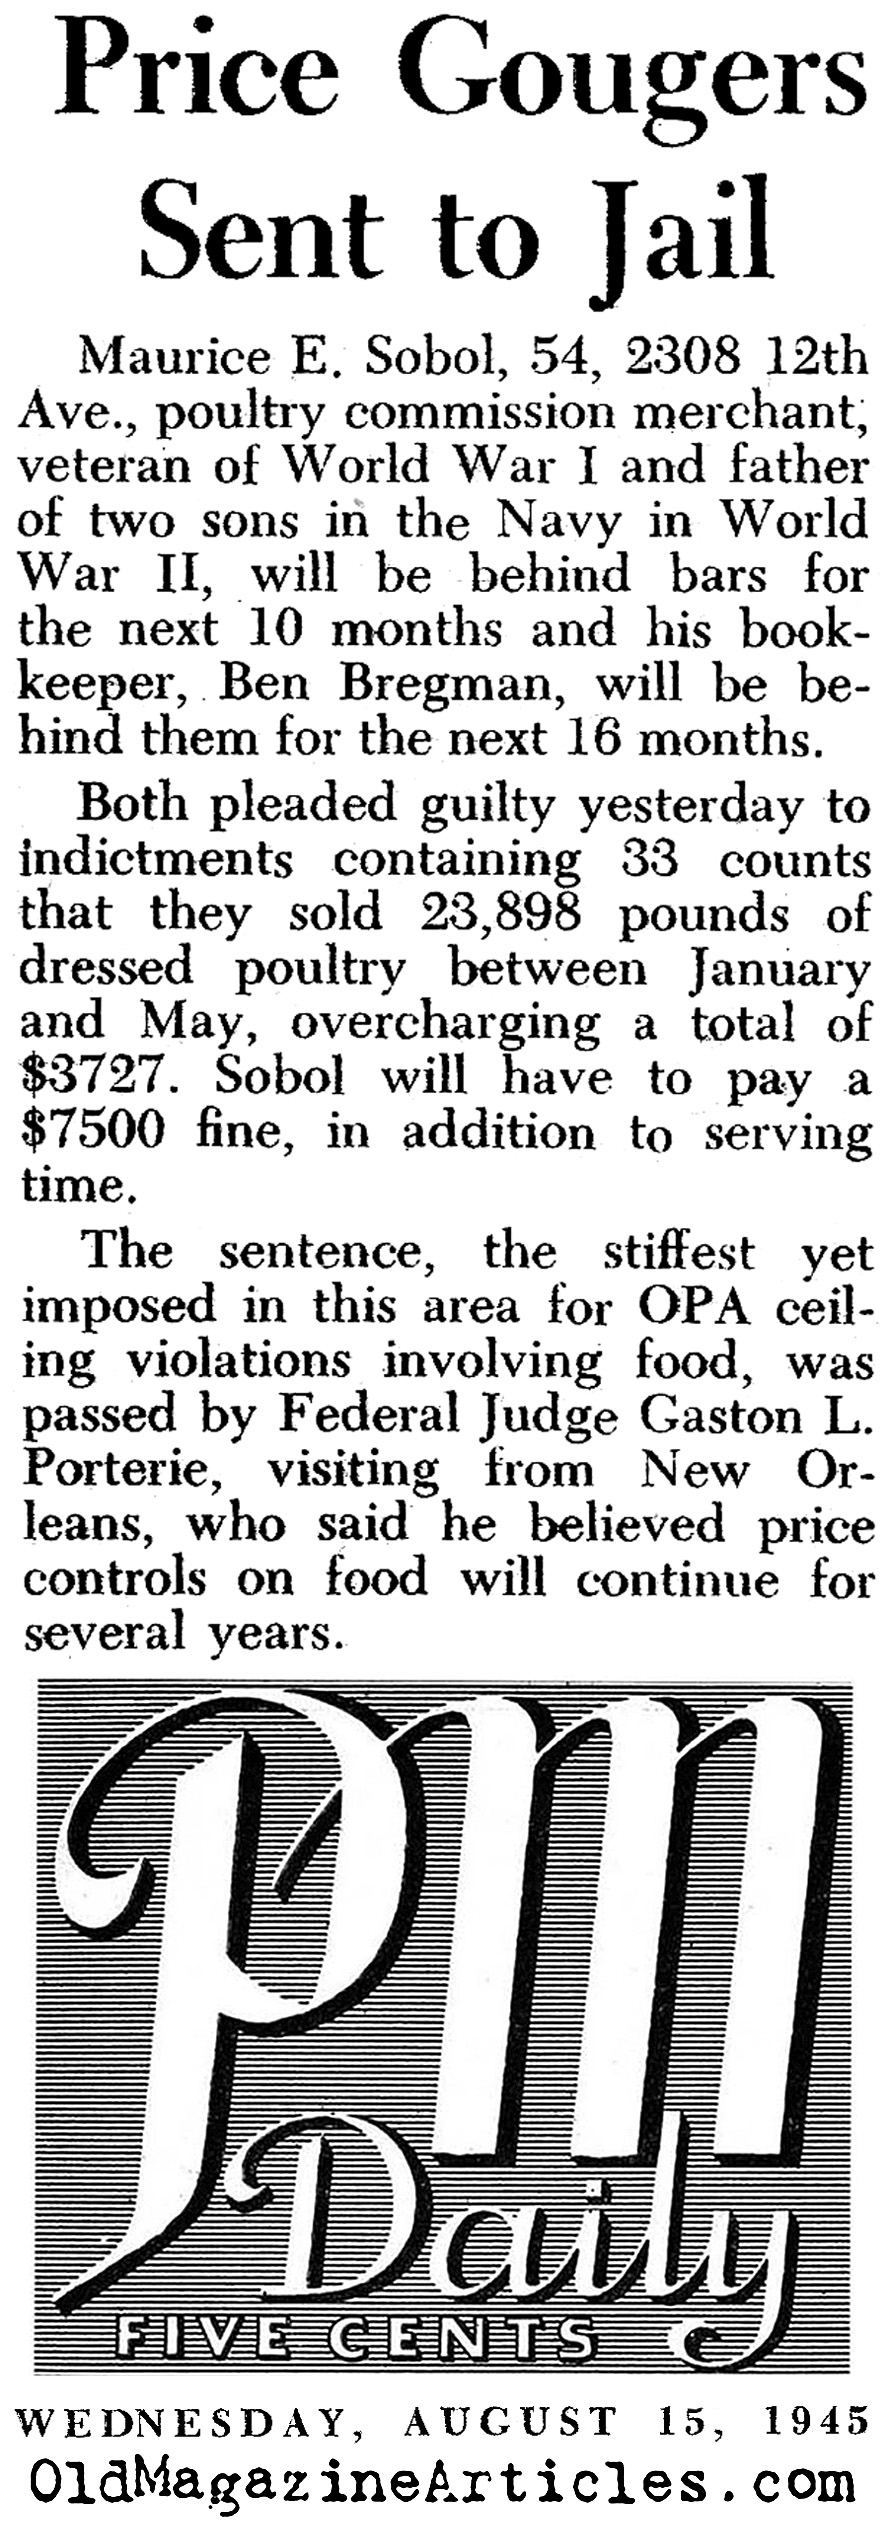 Price Gougers Sent to Jail' (PM Tabloid, 1945)